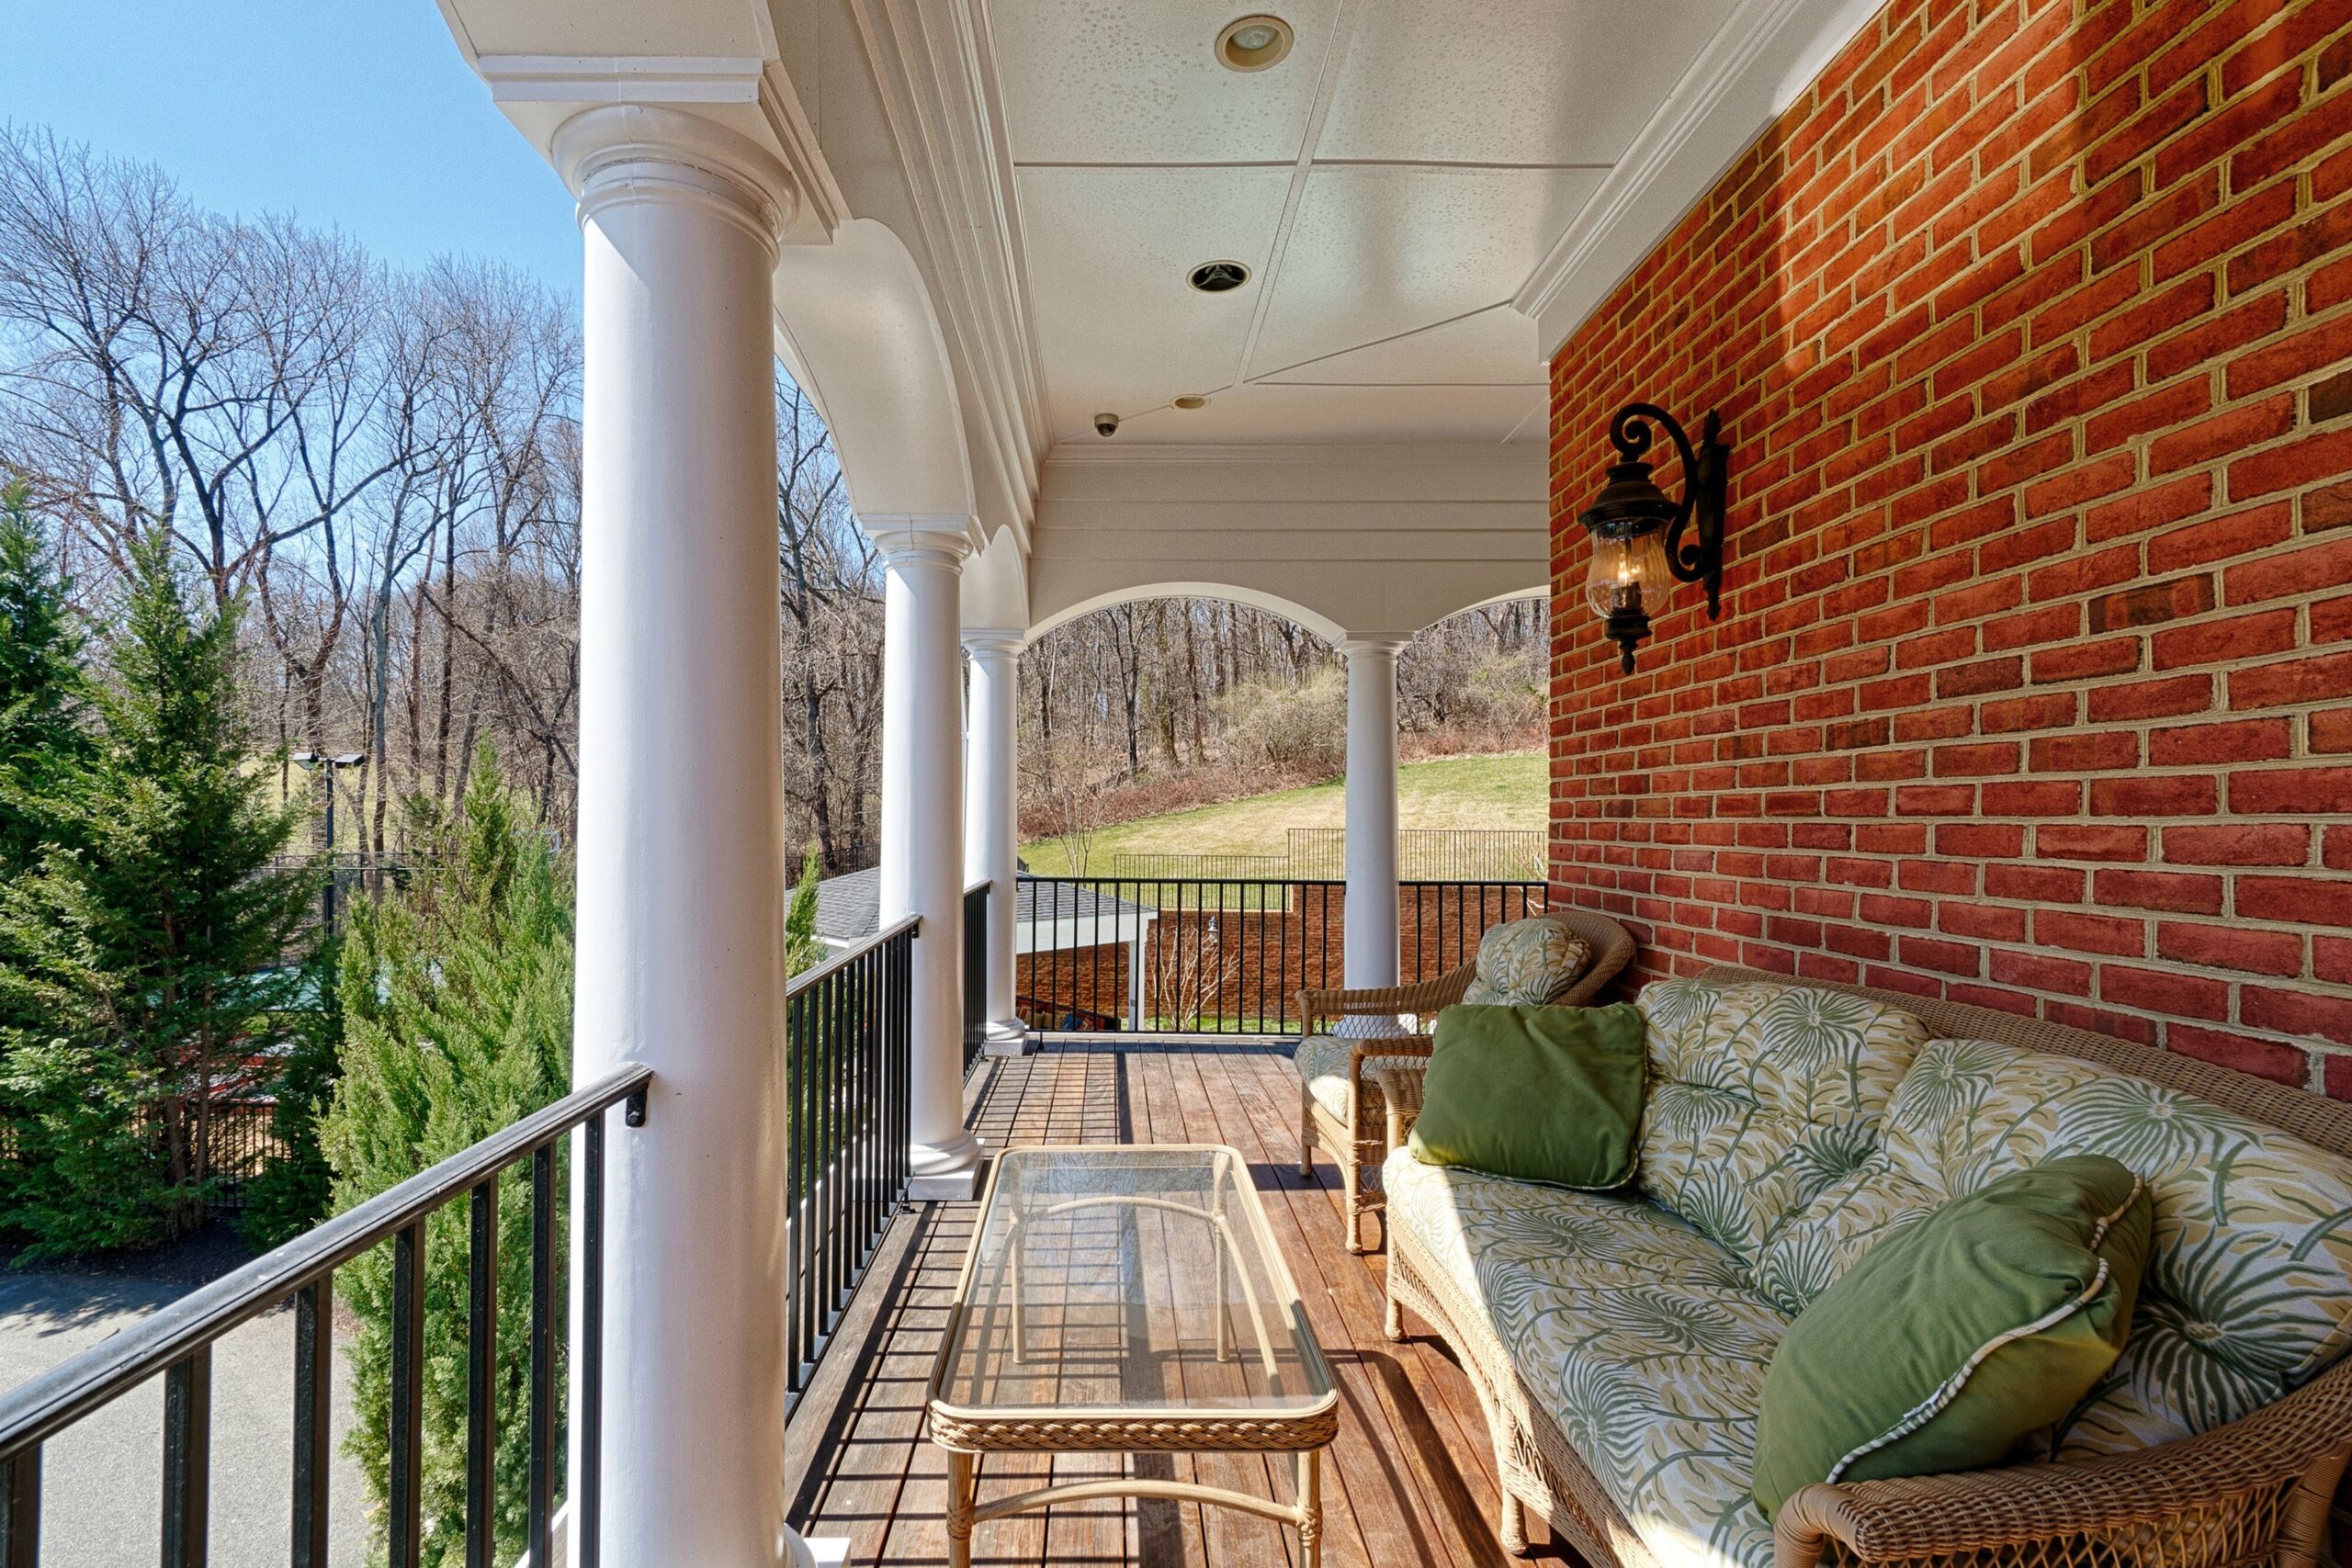 Exterior professional photo of 40573 Spectacular Bid Place - showing one of the balconies, brick side home with white columns and patio furniture
